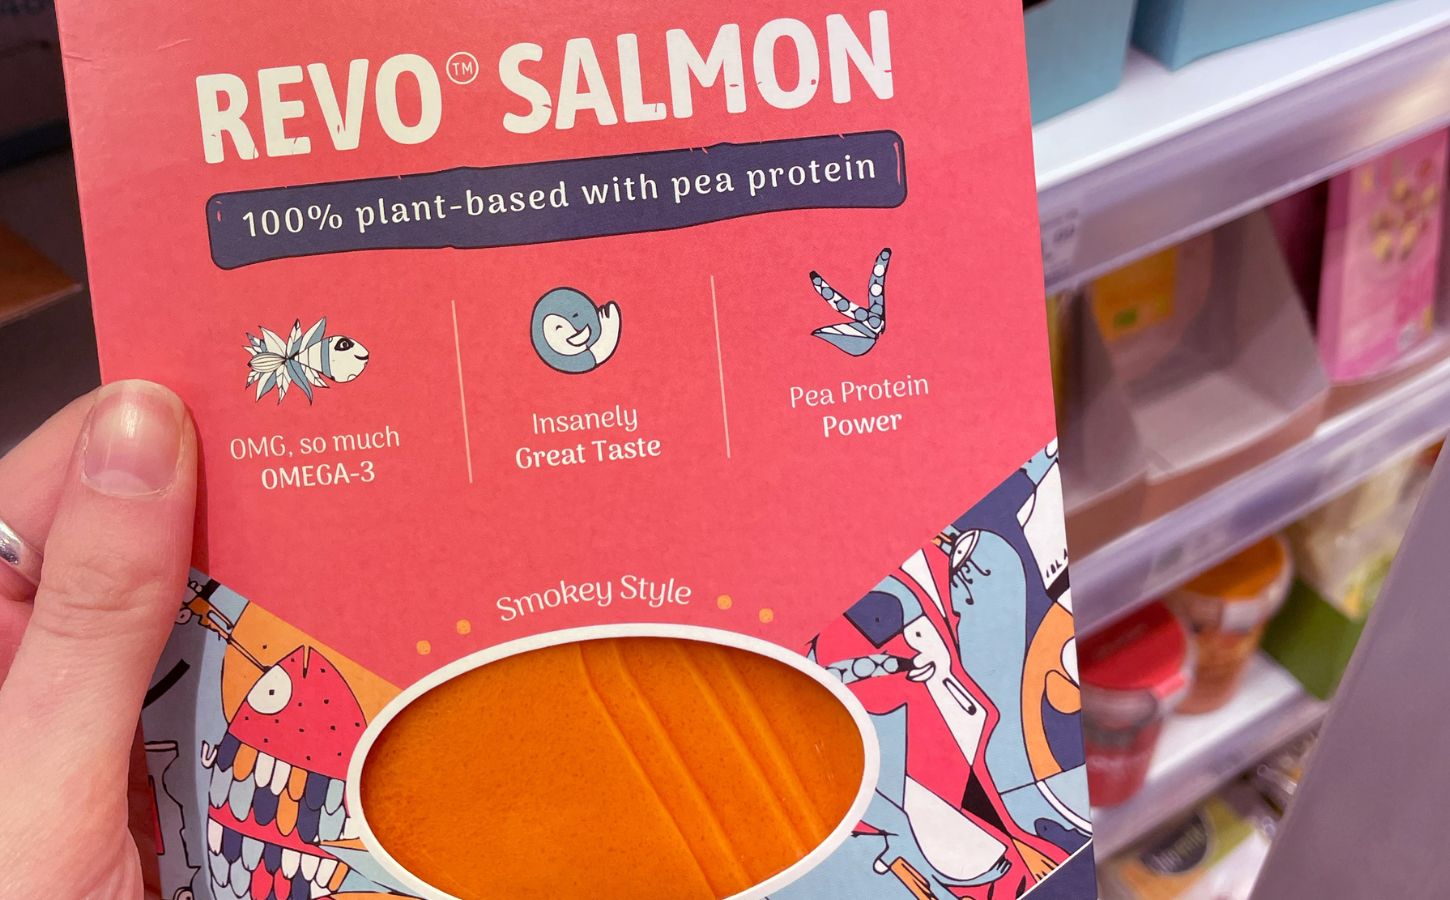 Photo shows someone holding a package of plant-based 'Revo Salmon' in the supermarket.